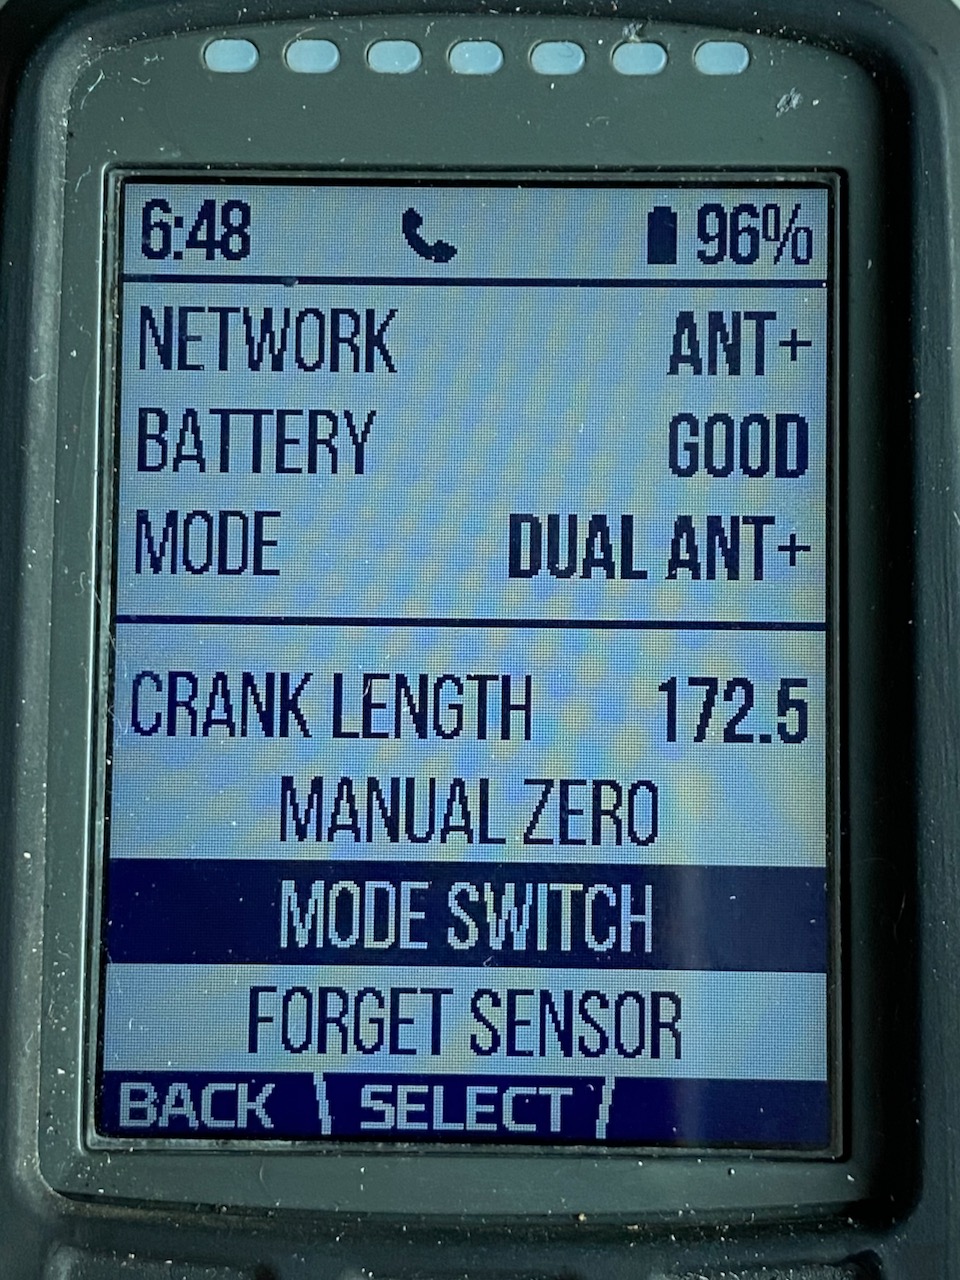 The Wahoo Elemnt Bolt devices page showing the Pioneer Mode Switch option